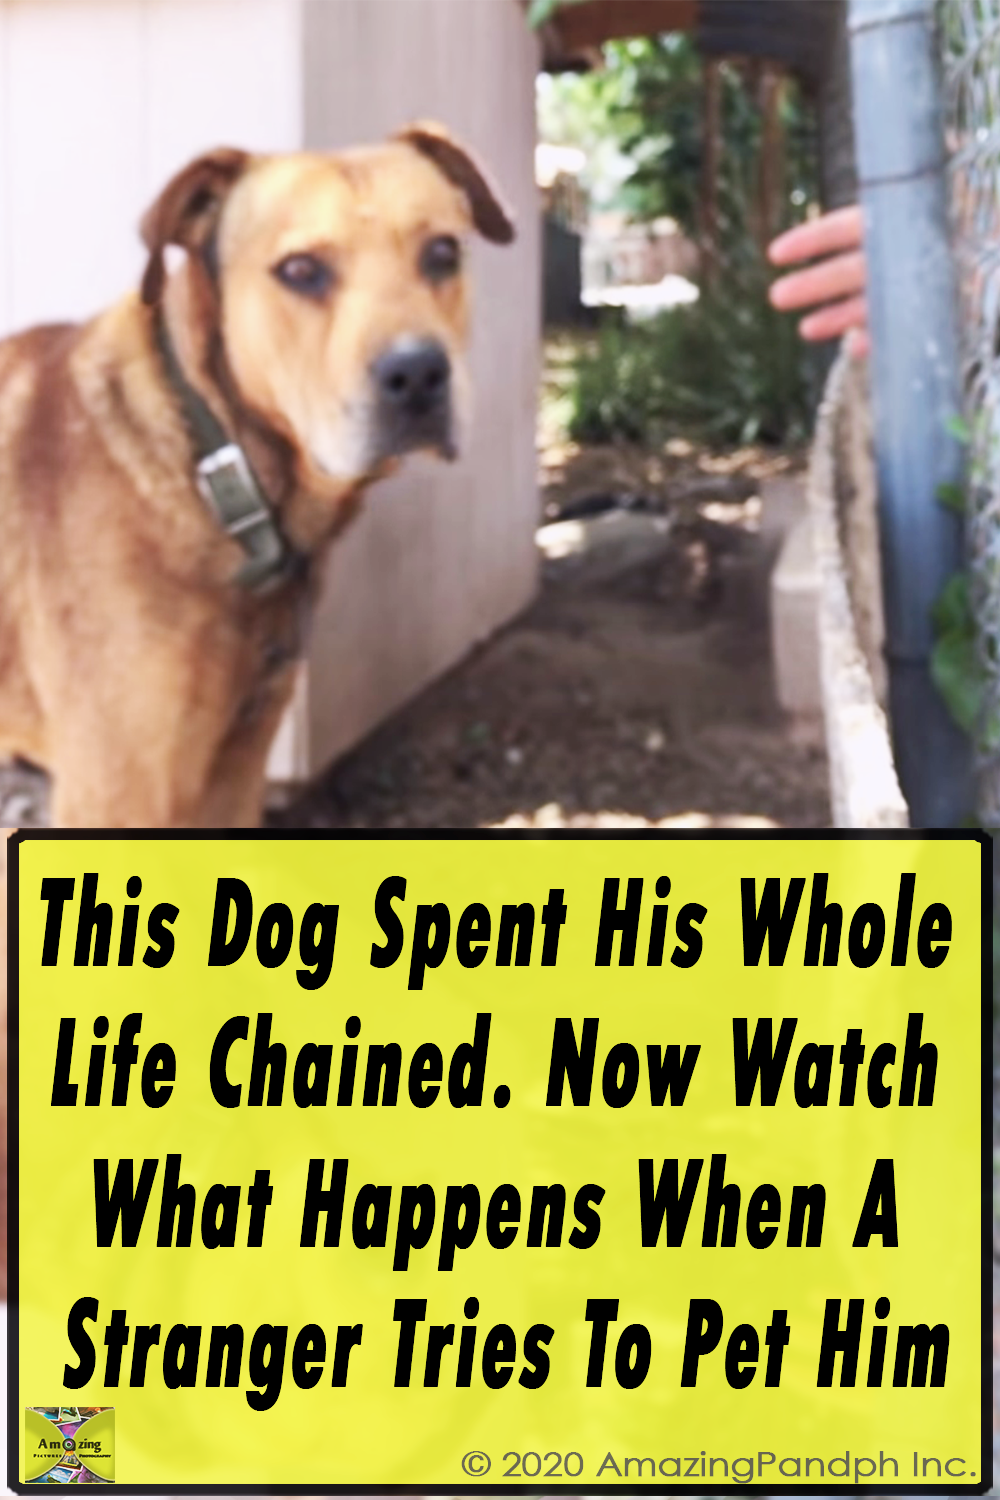 This Dog, Spent, His Whole Life, Chained,chained dog,chains,dog,pets,video,Life